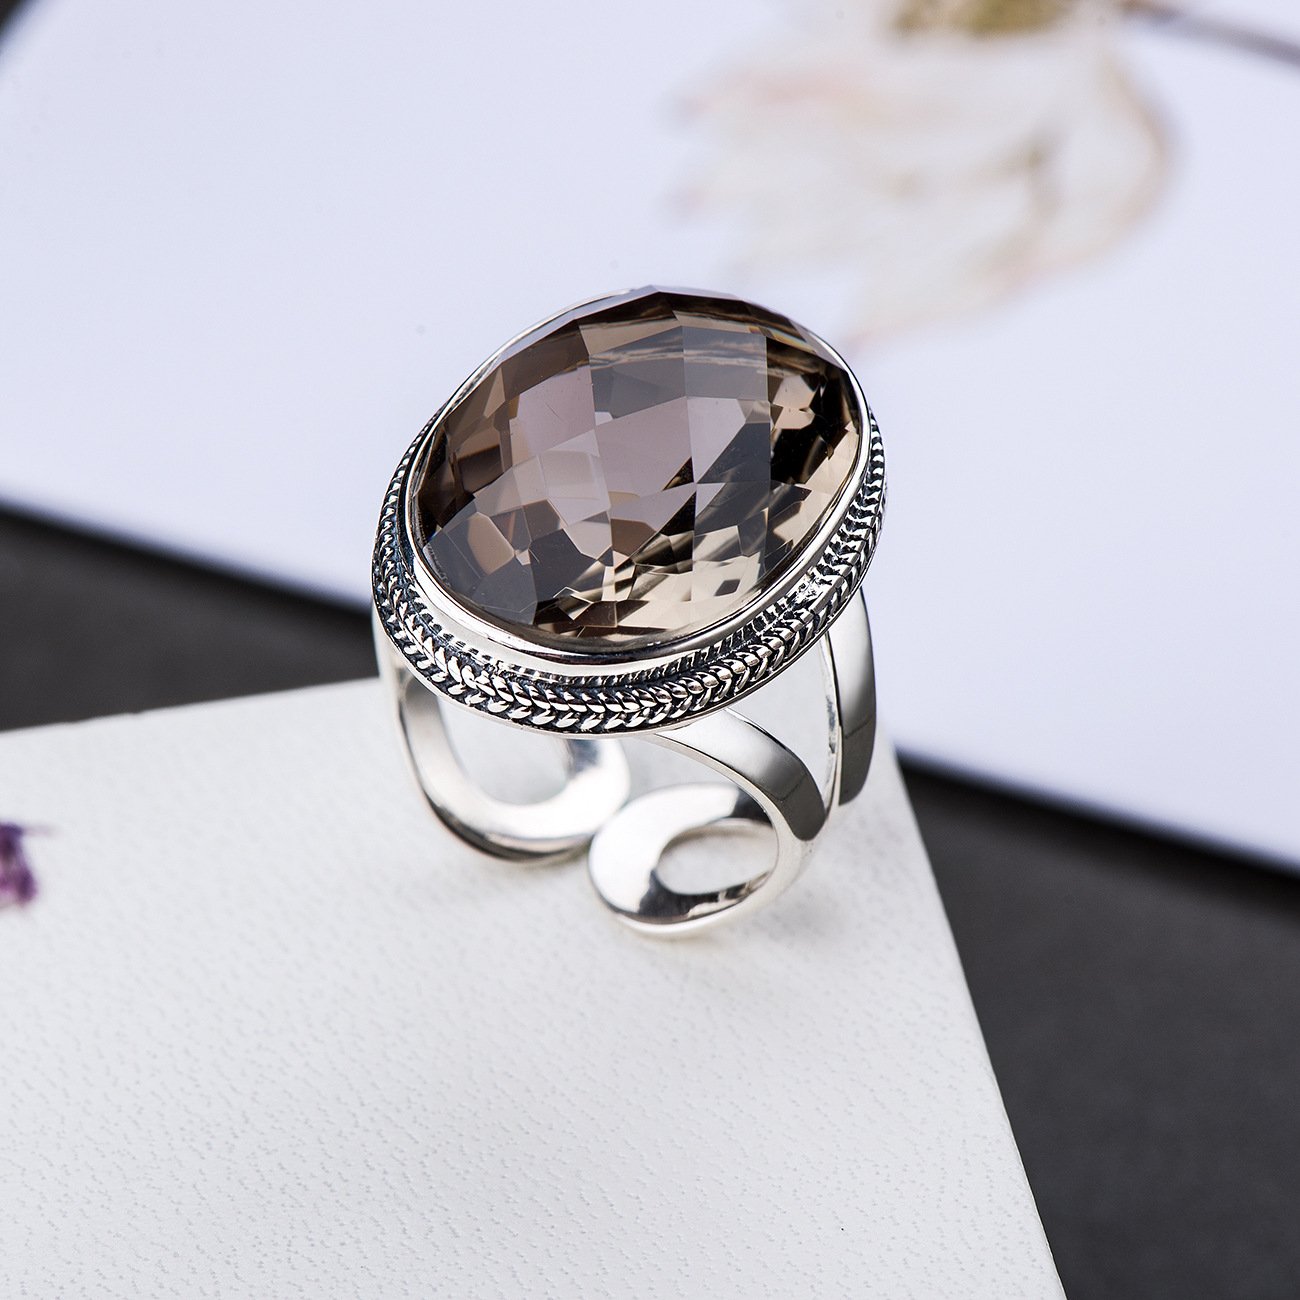 Gorgeous Tawny Crystal Adjustable Ring